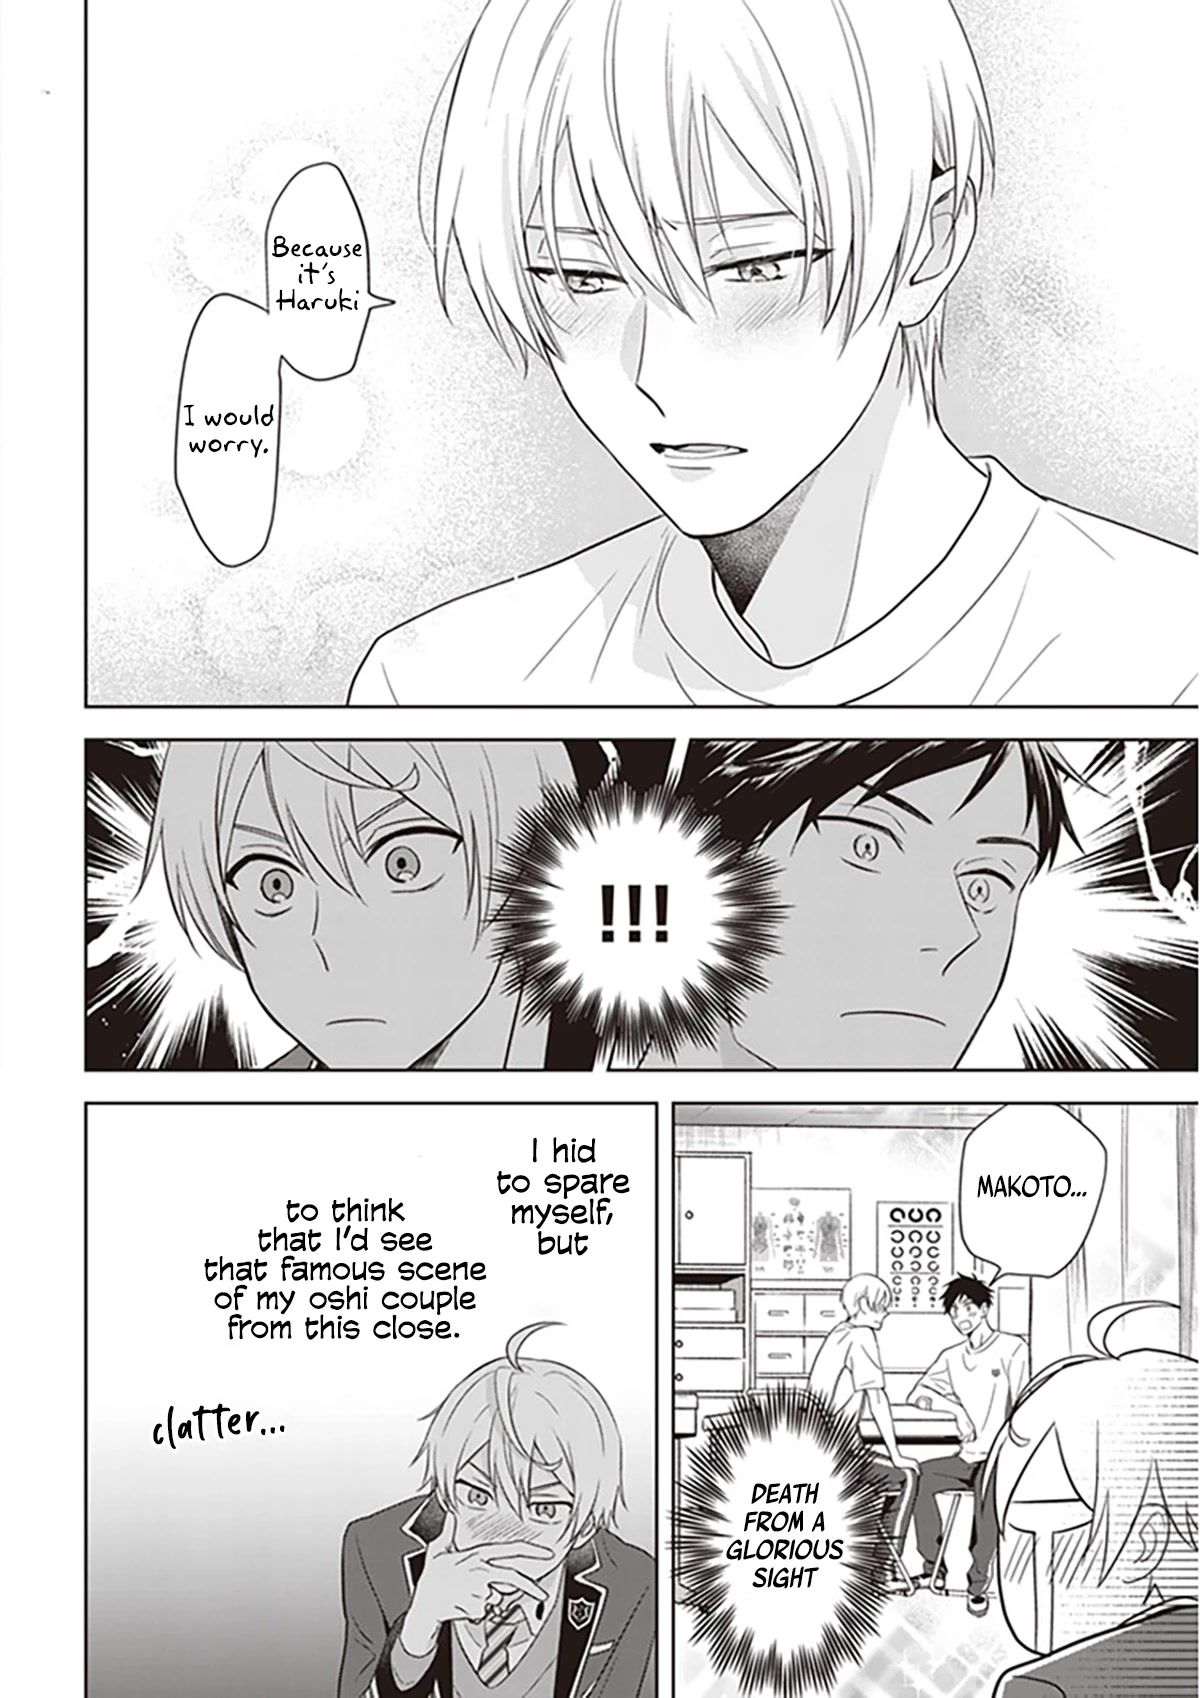 I Realized I Am The Younger Brother Of The Protagonist In A Bl Game - chapter 6.5 - #5